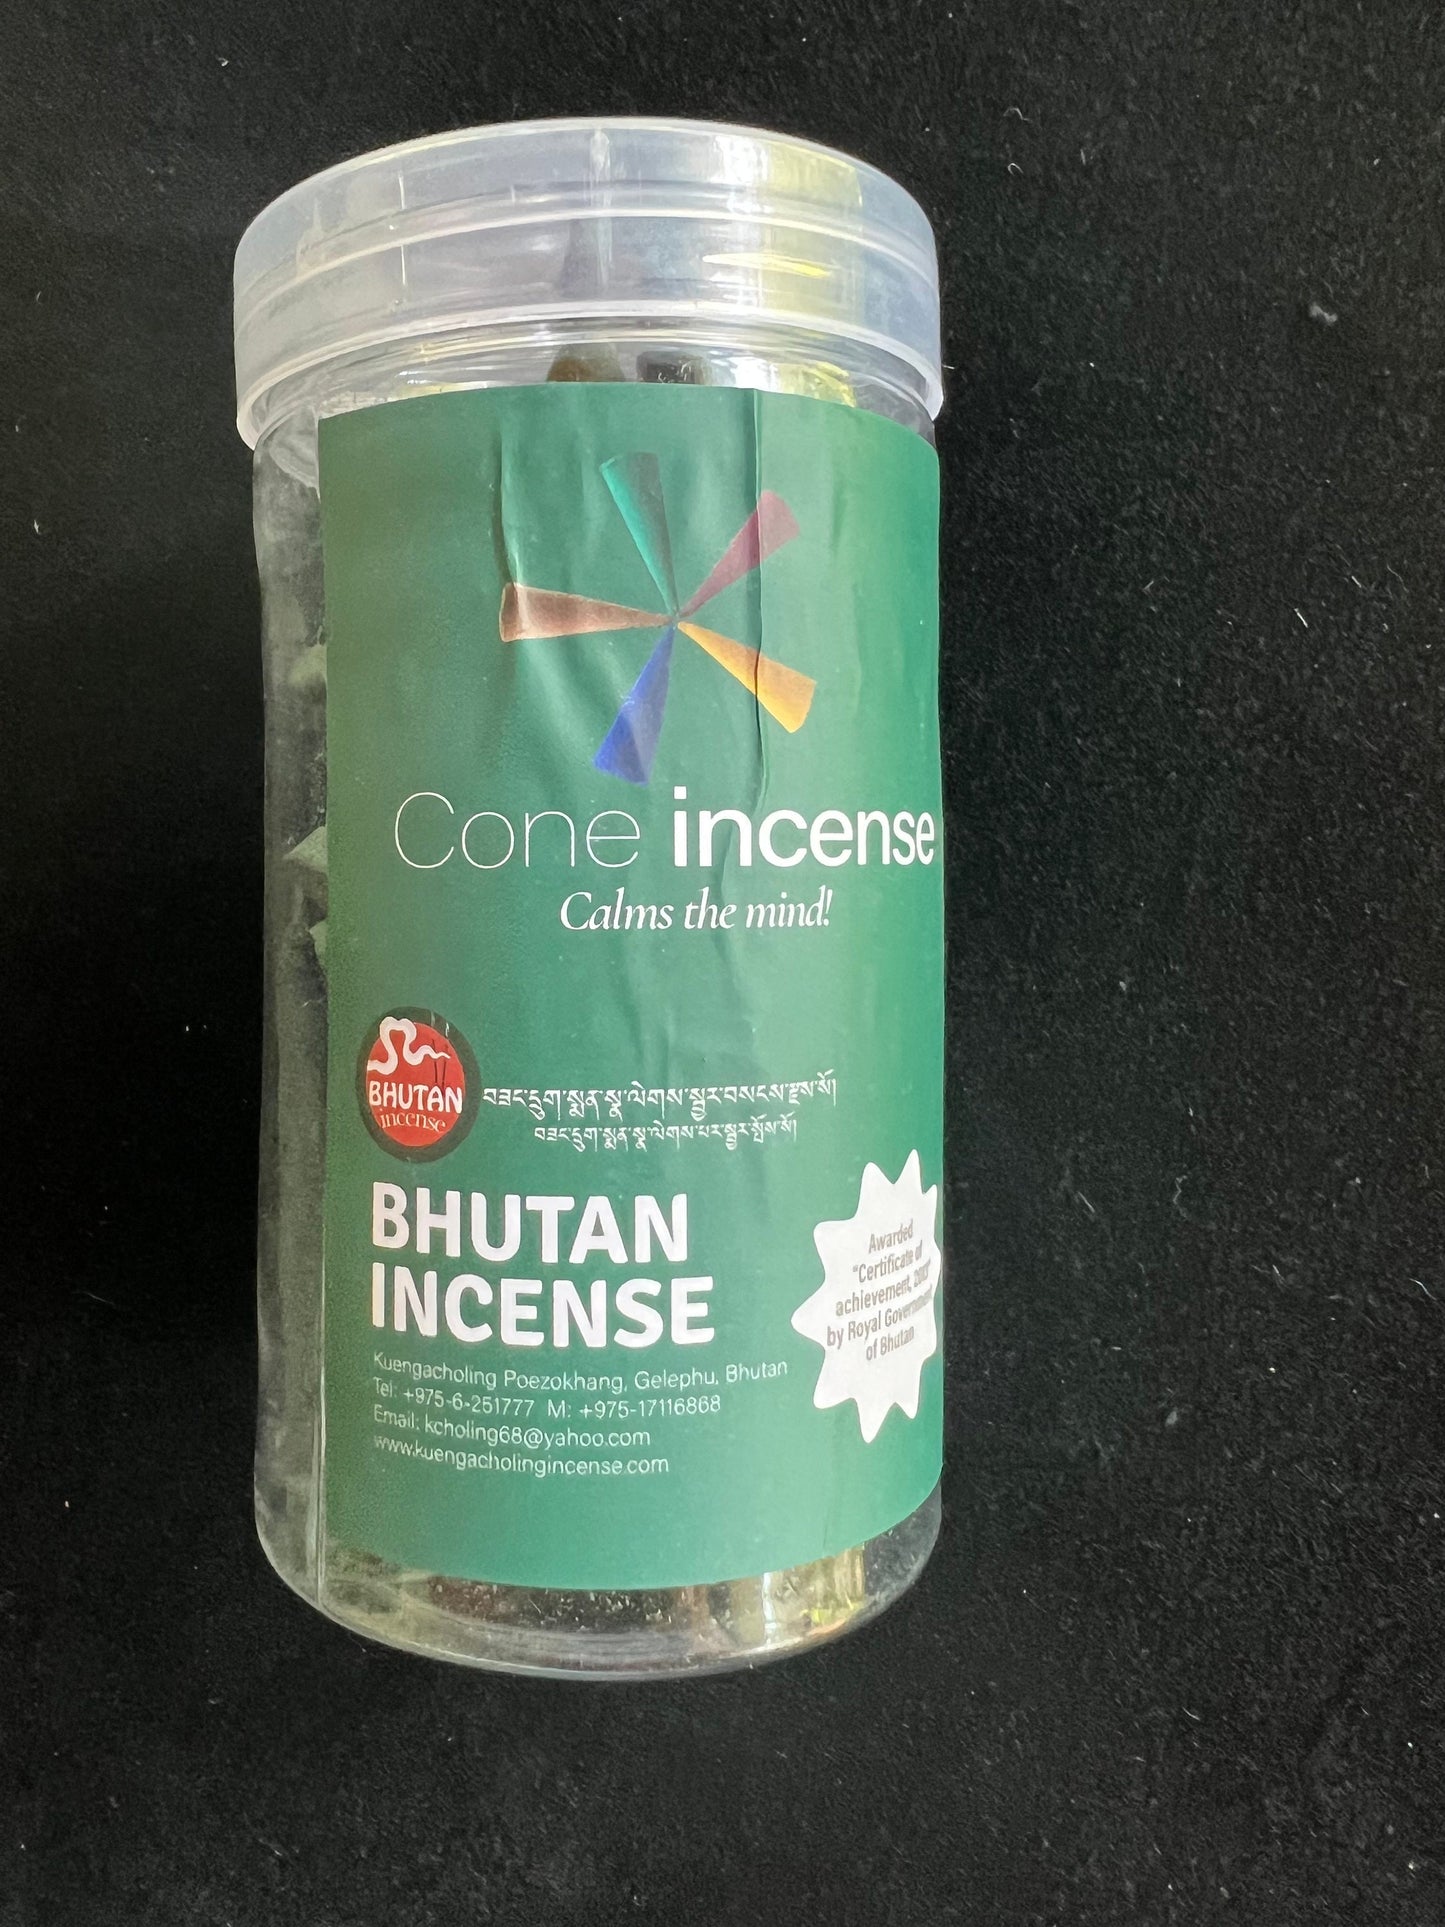 Green Cone Incense | Bhutanese Incense | 20 cones | 2in high cones | ceramic burner included | Kuengacholing